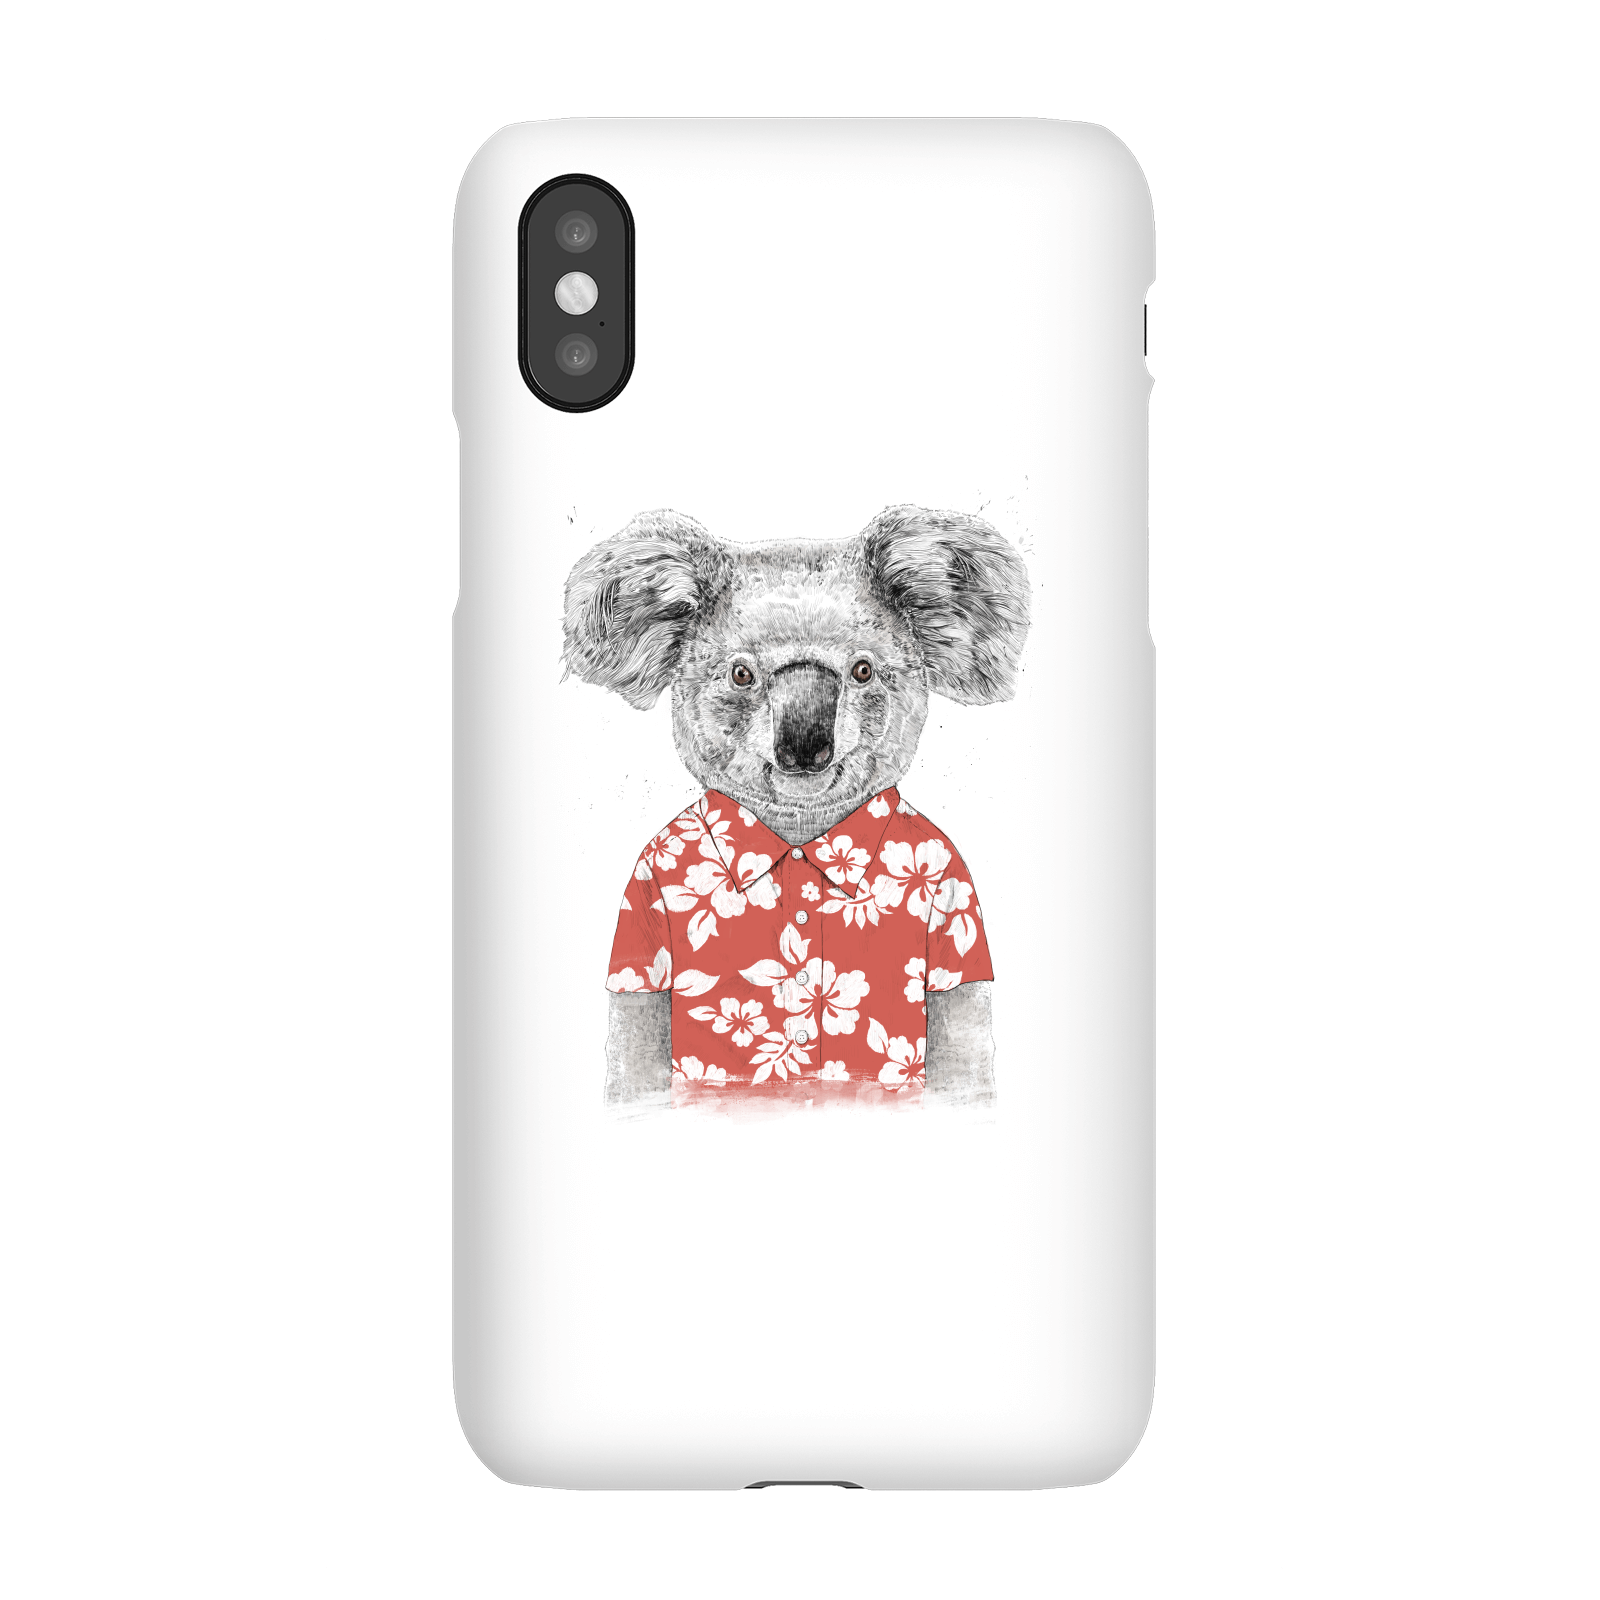 Balazs Solti Koala Bear Phone Case for iPhone and Android - iPhone 11 Pro Max - Snap Case - Matte